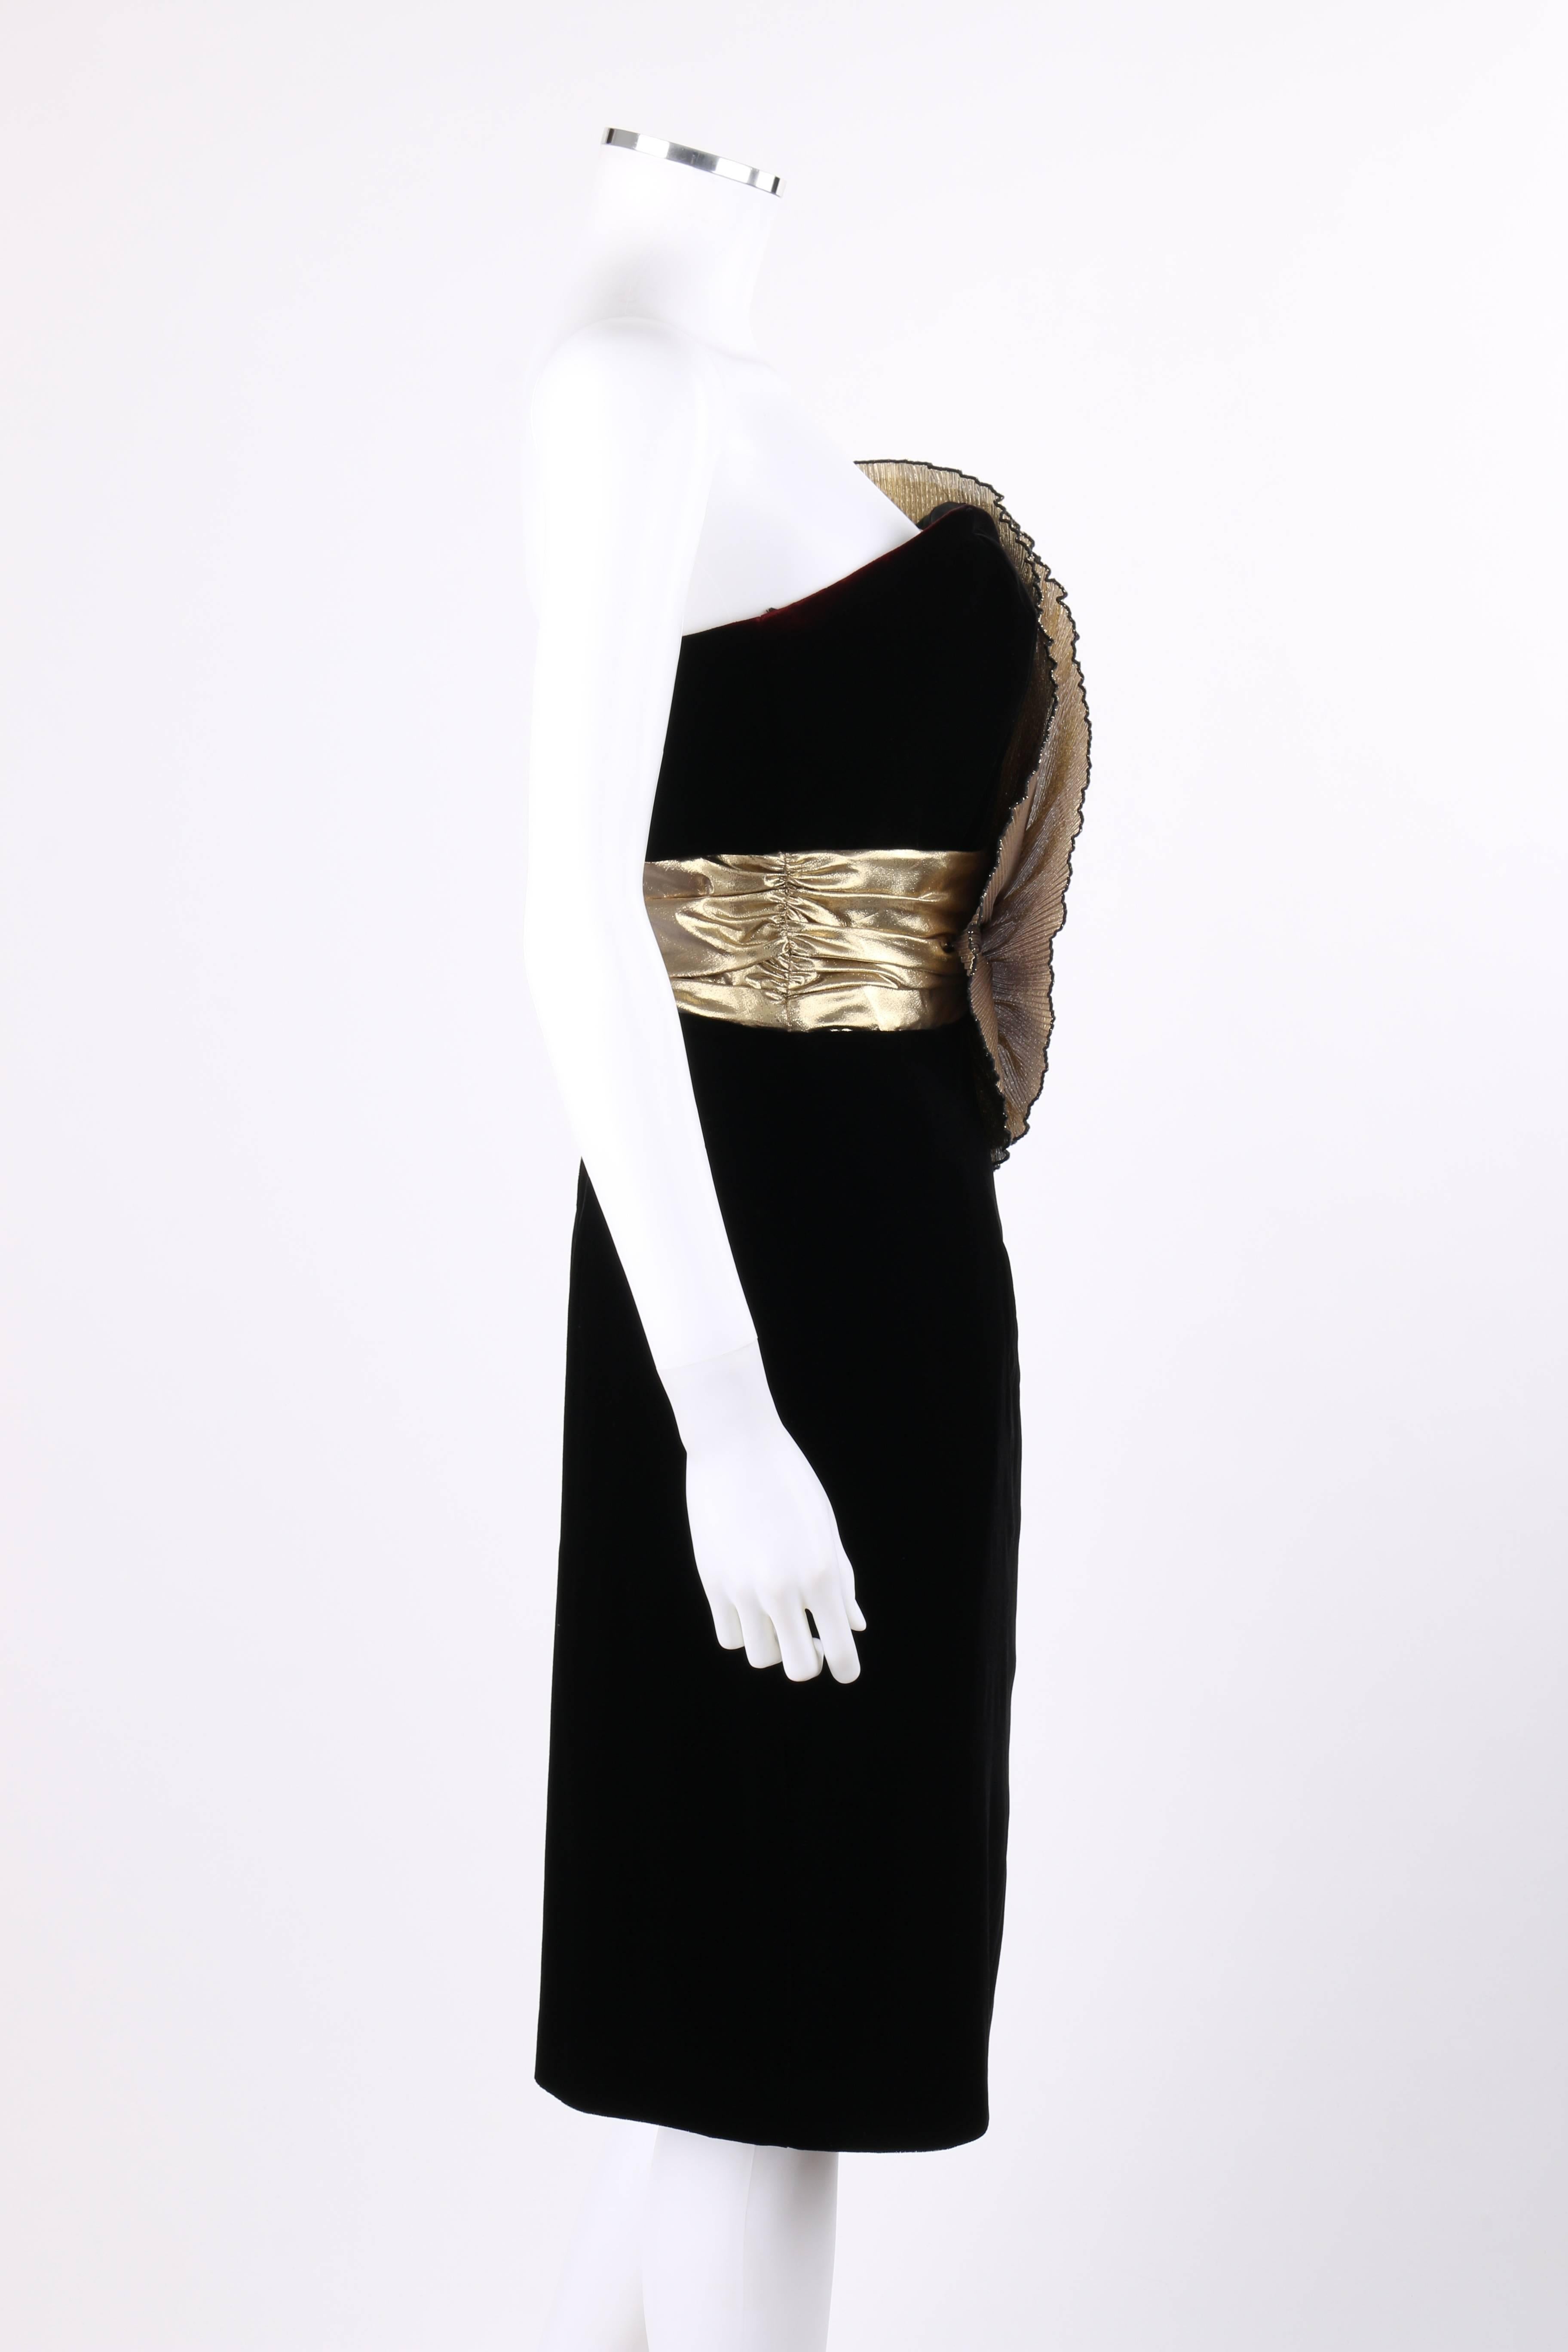 Dave & Johnny by Jroseph Lara c.1980's black velvet and metallic gold lame statement dress. Large gold lame accordion pleated fan gathered with rhinestone crystal embellishment at front waist. Strapless shift style. Sweet heart neckline.